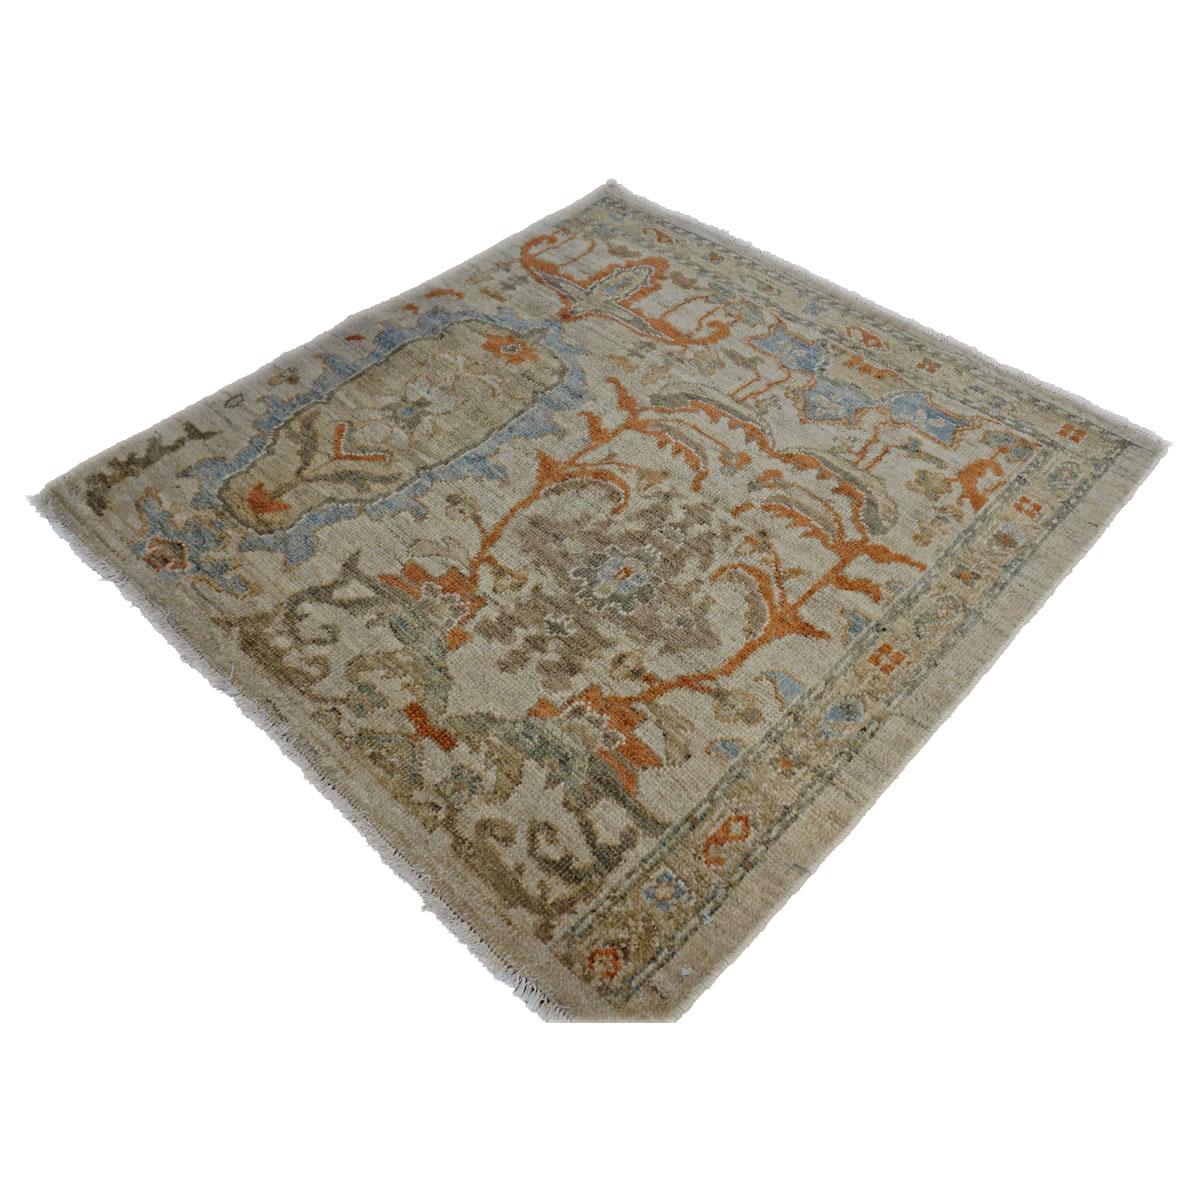 Contemporary 21st Century Persian Sultanabad Master 3x3 Ivory, Rust, & Blue Handmade Area Rug For Sale